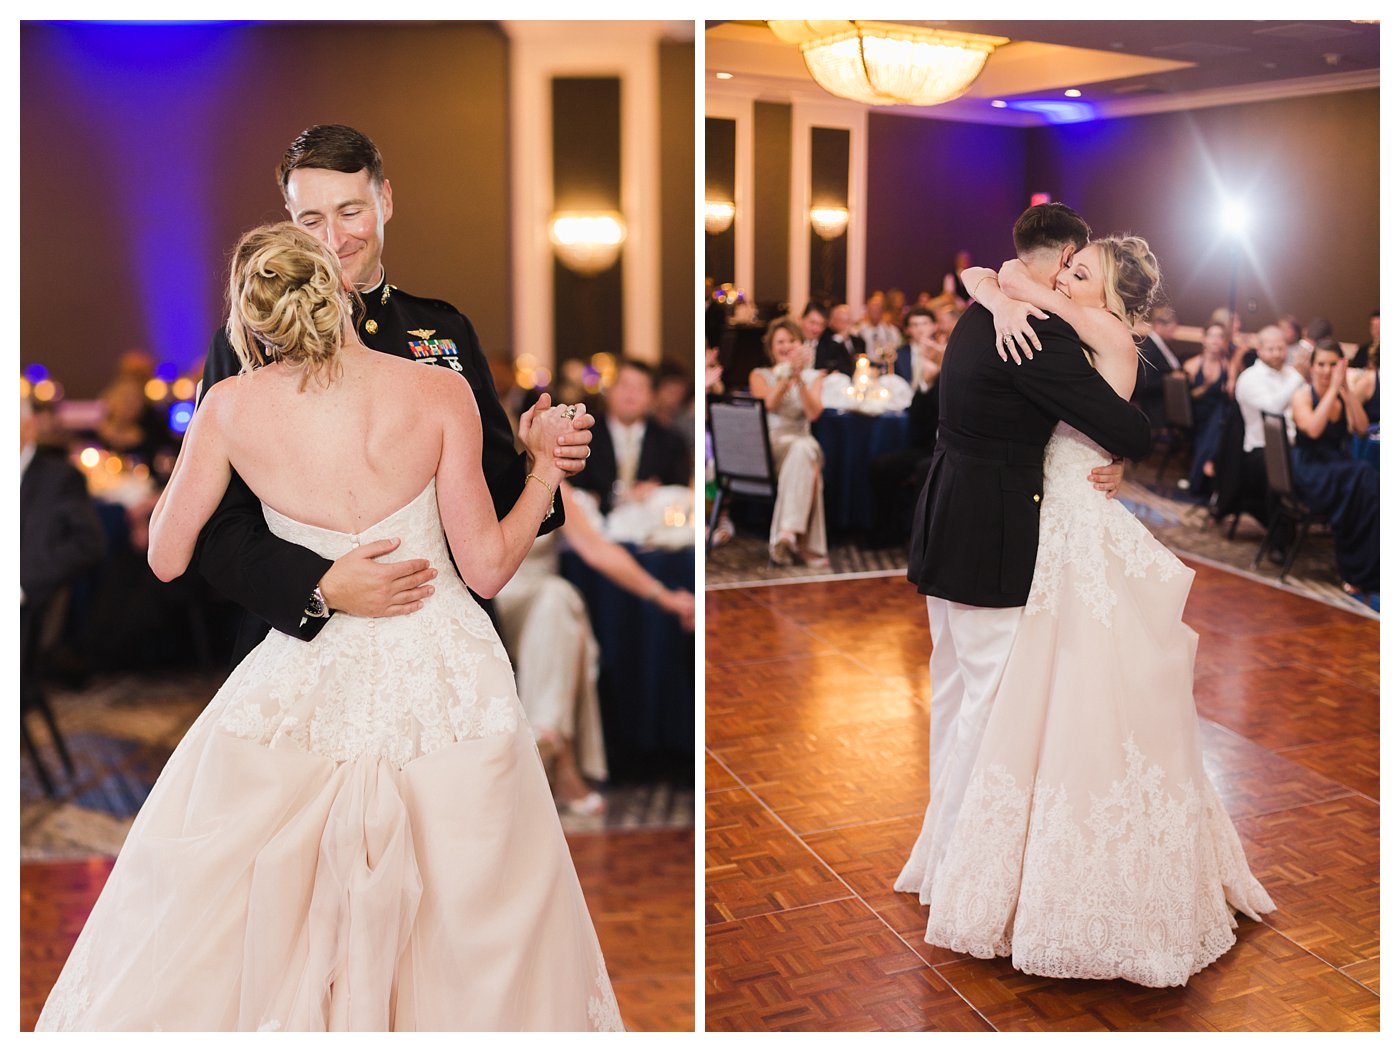 First Dances at the United States Naval Academy Wedding by Amanda and Grady Photography